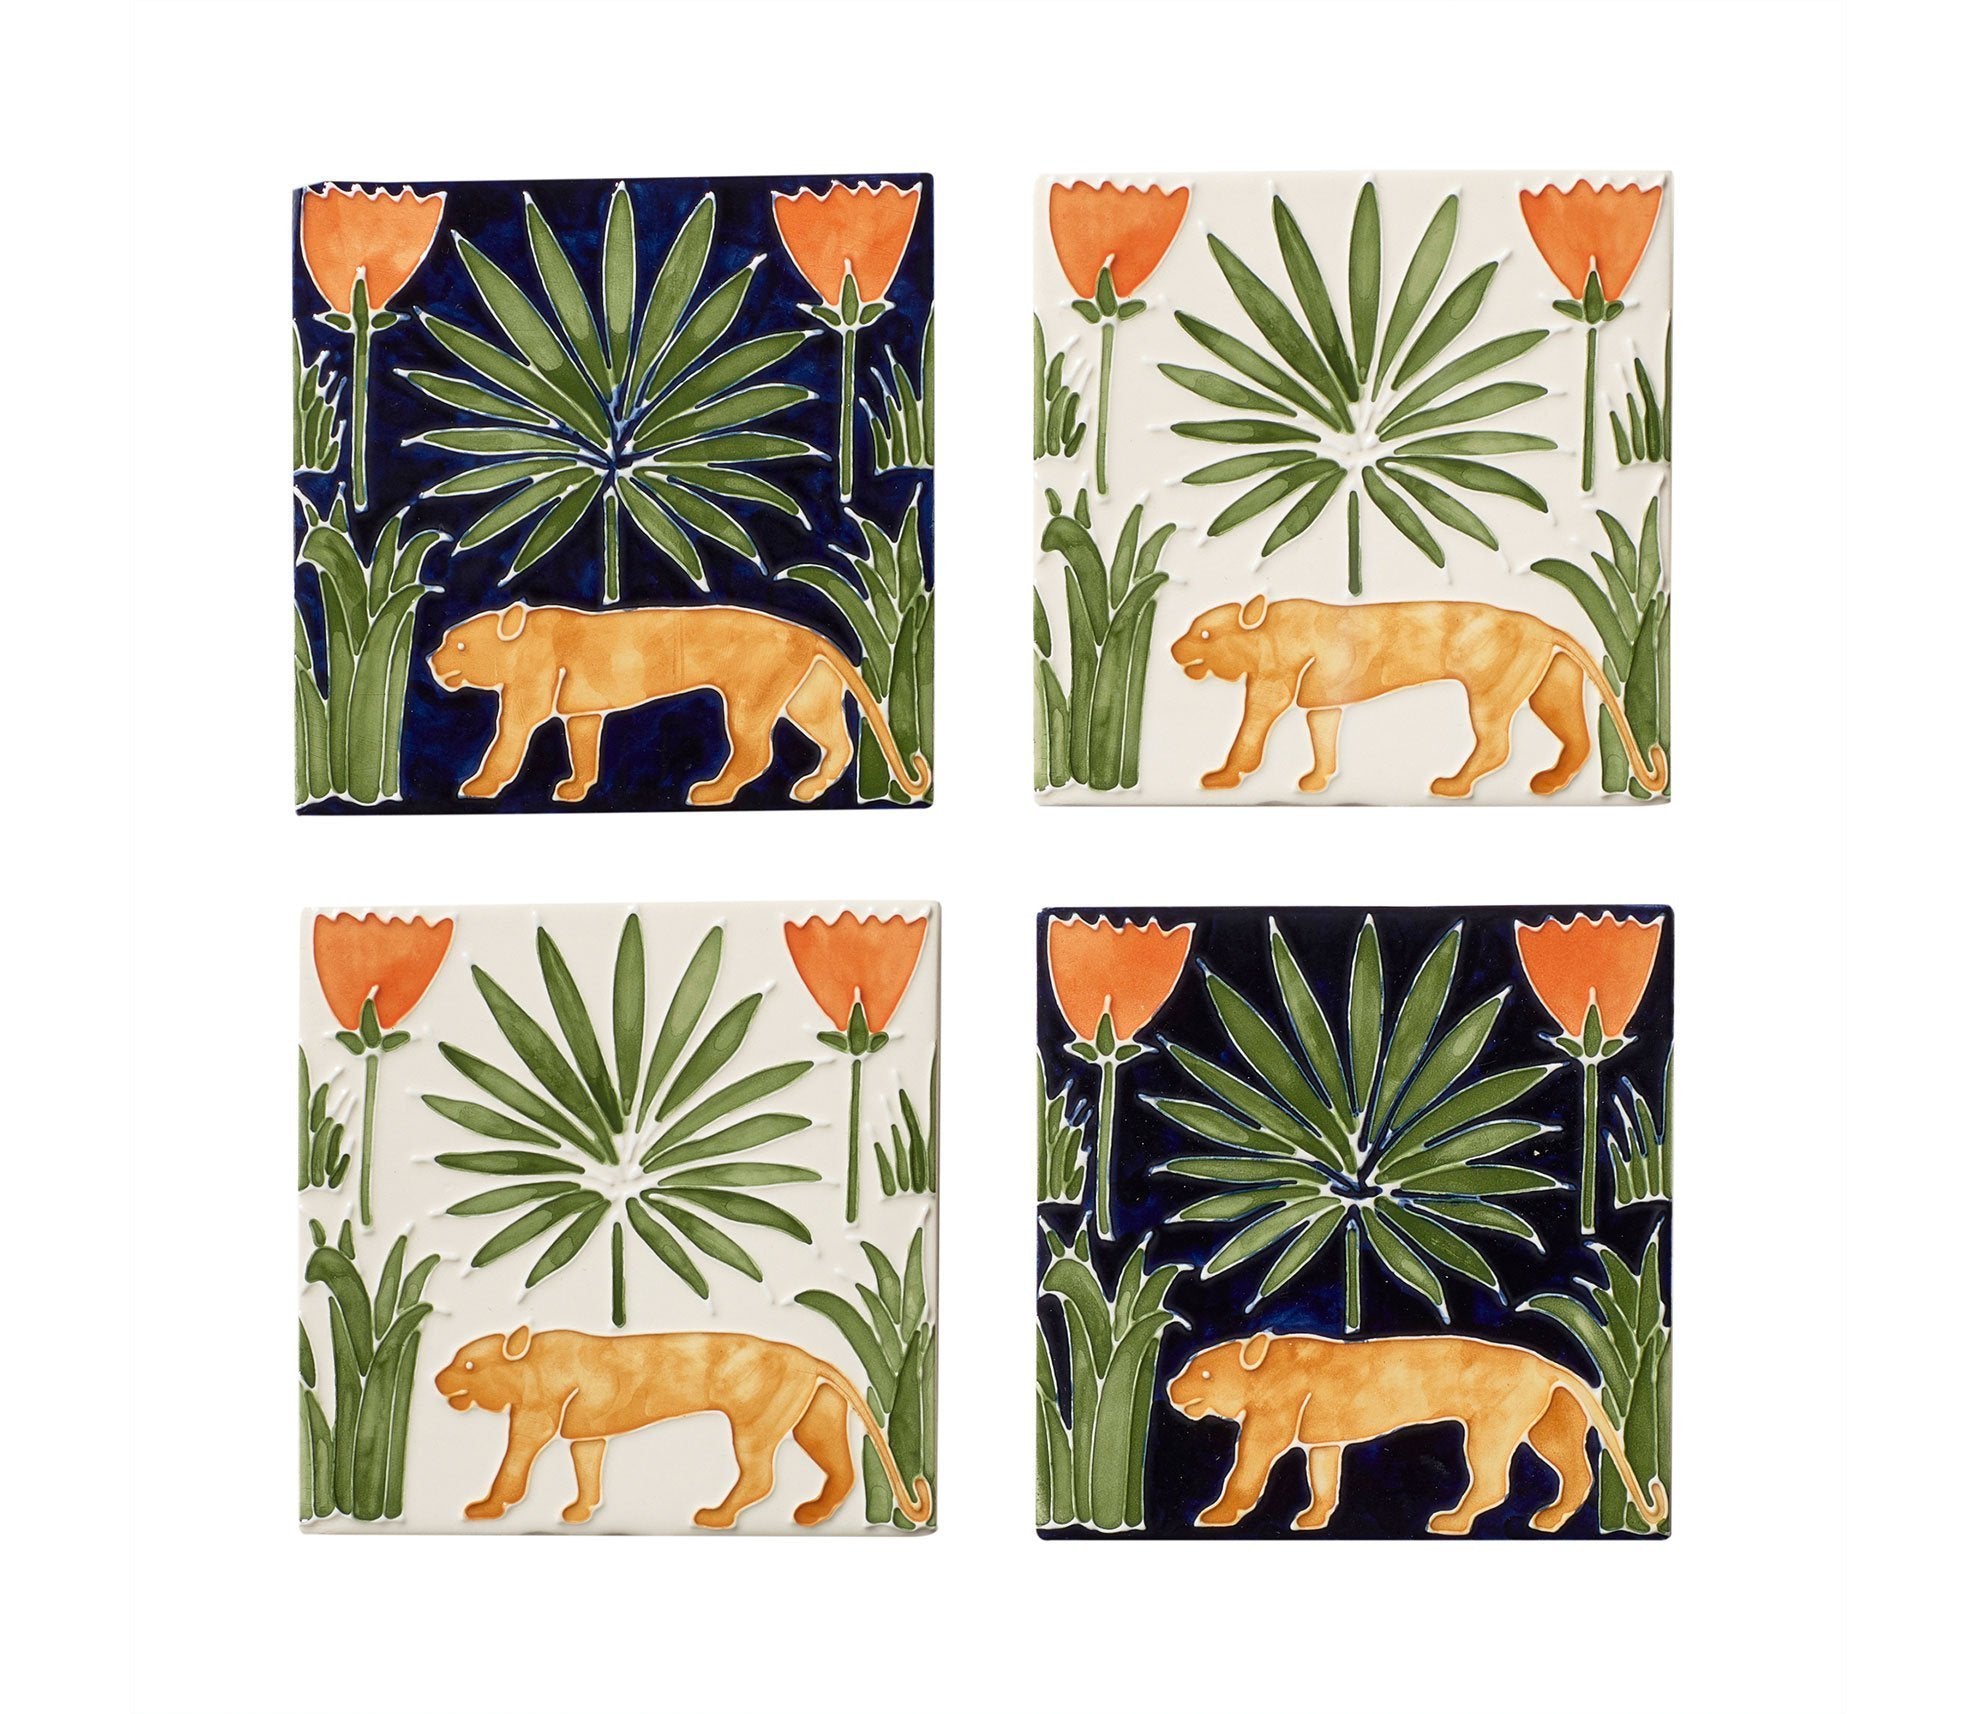 Lioness & Palms Tiles Product Image 2